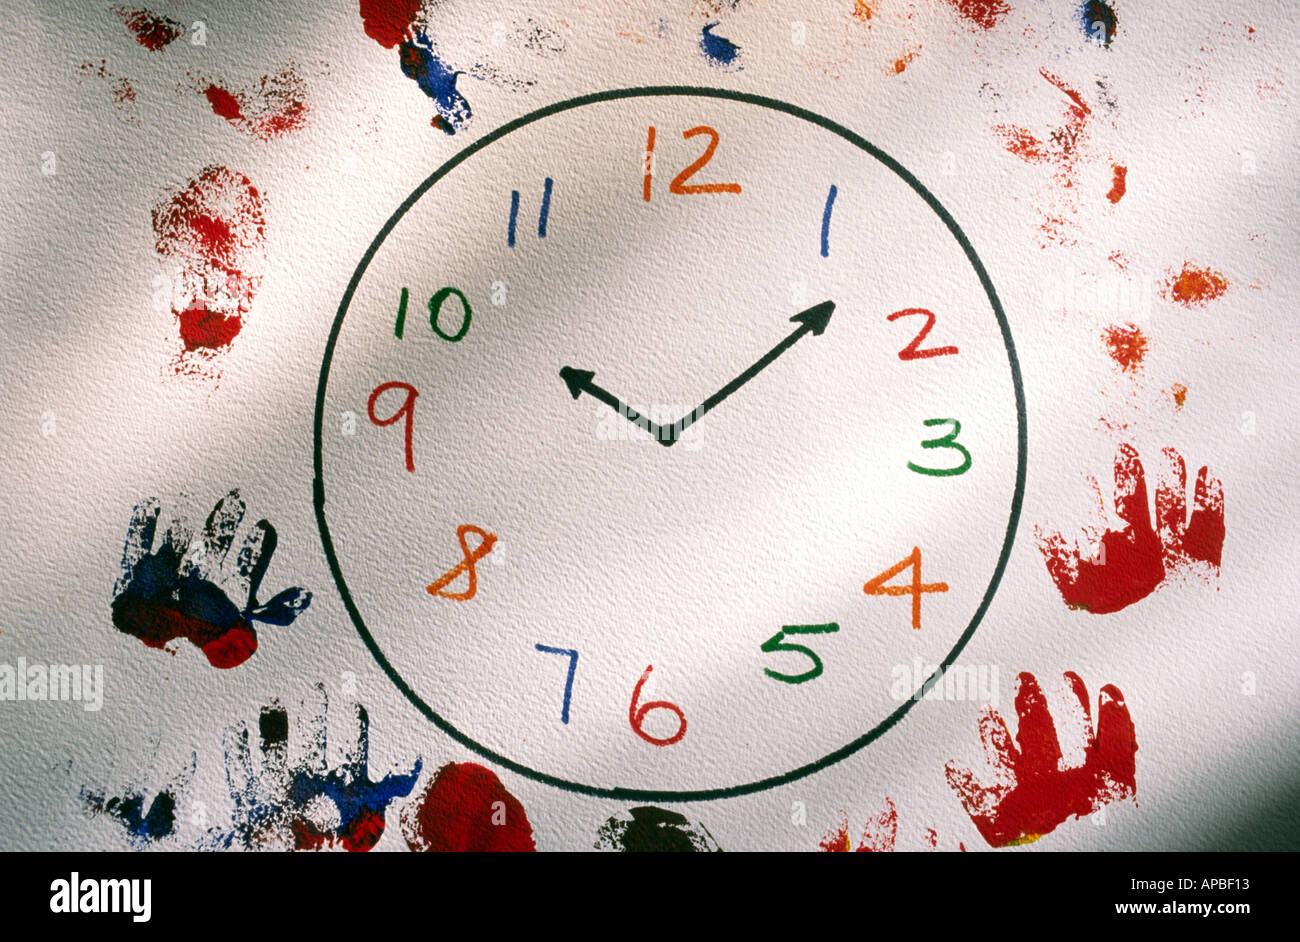 Child drawing of a clock face with hand and foot prints Stock Photo